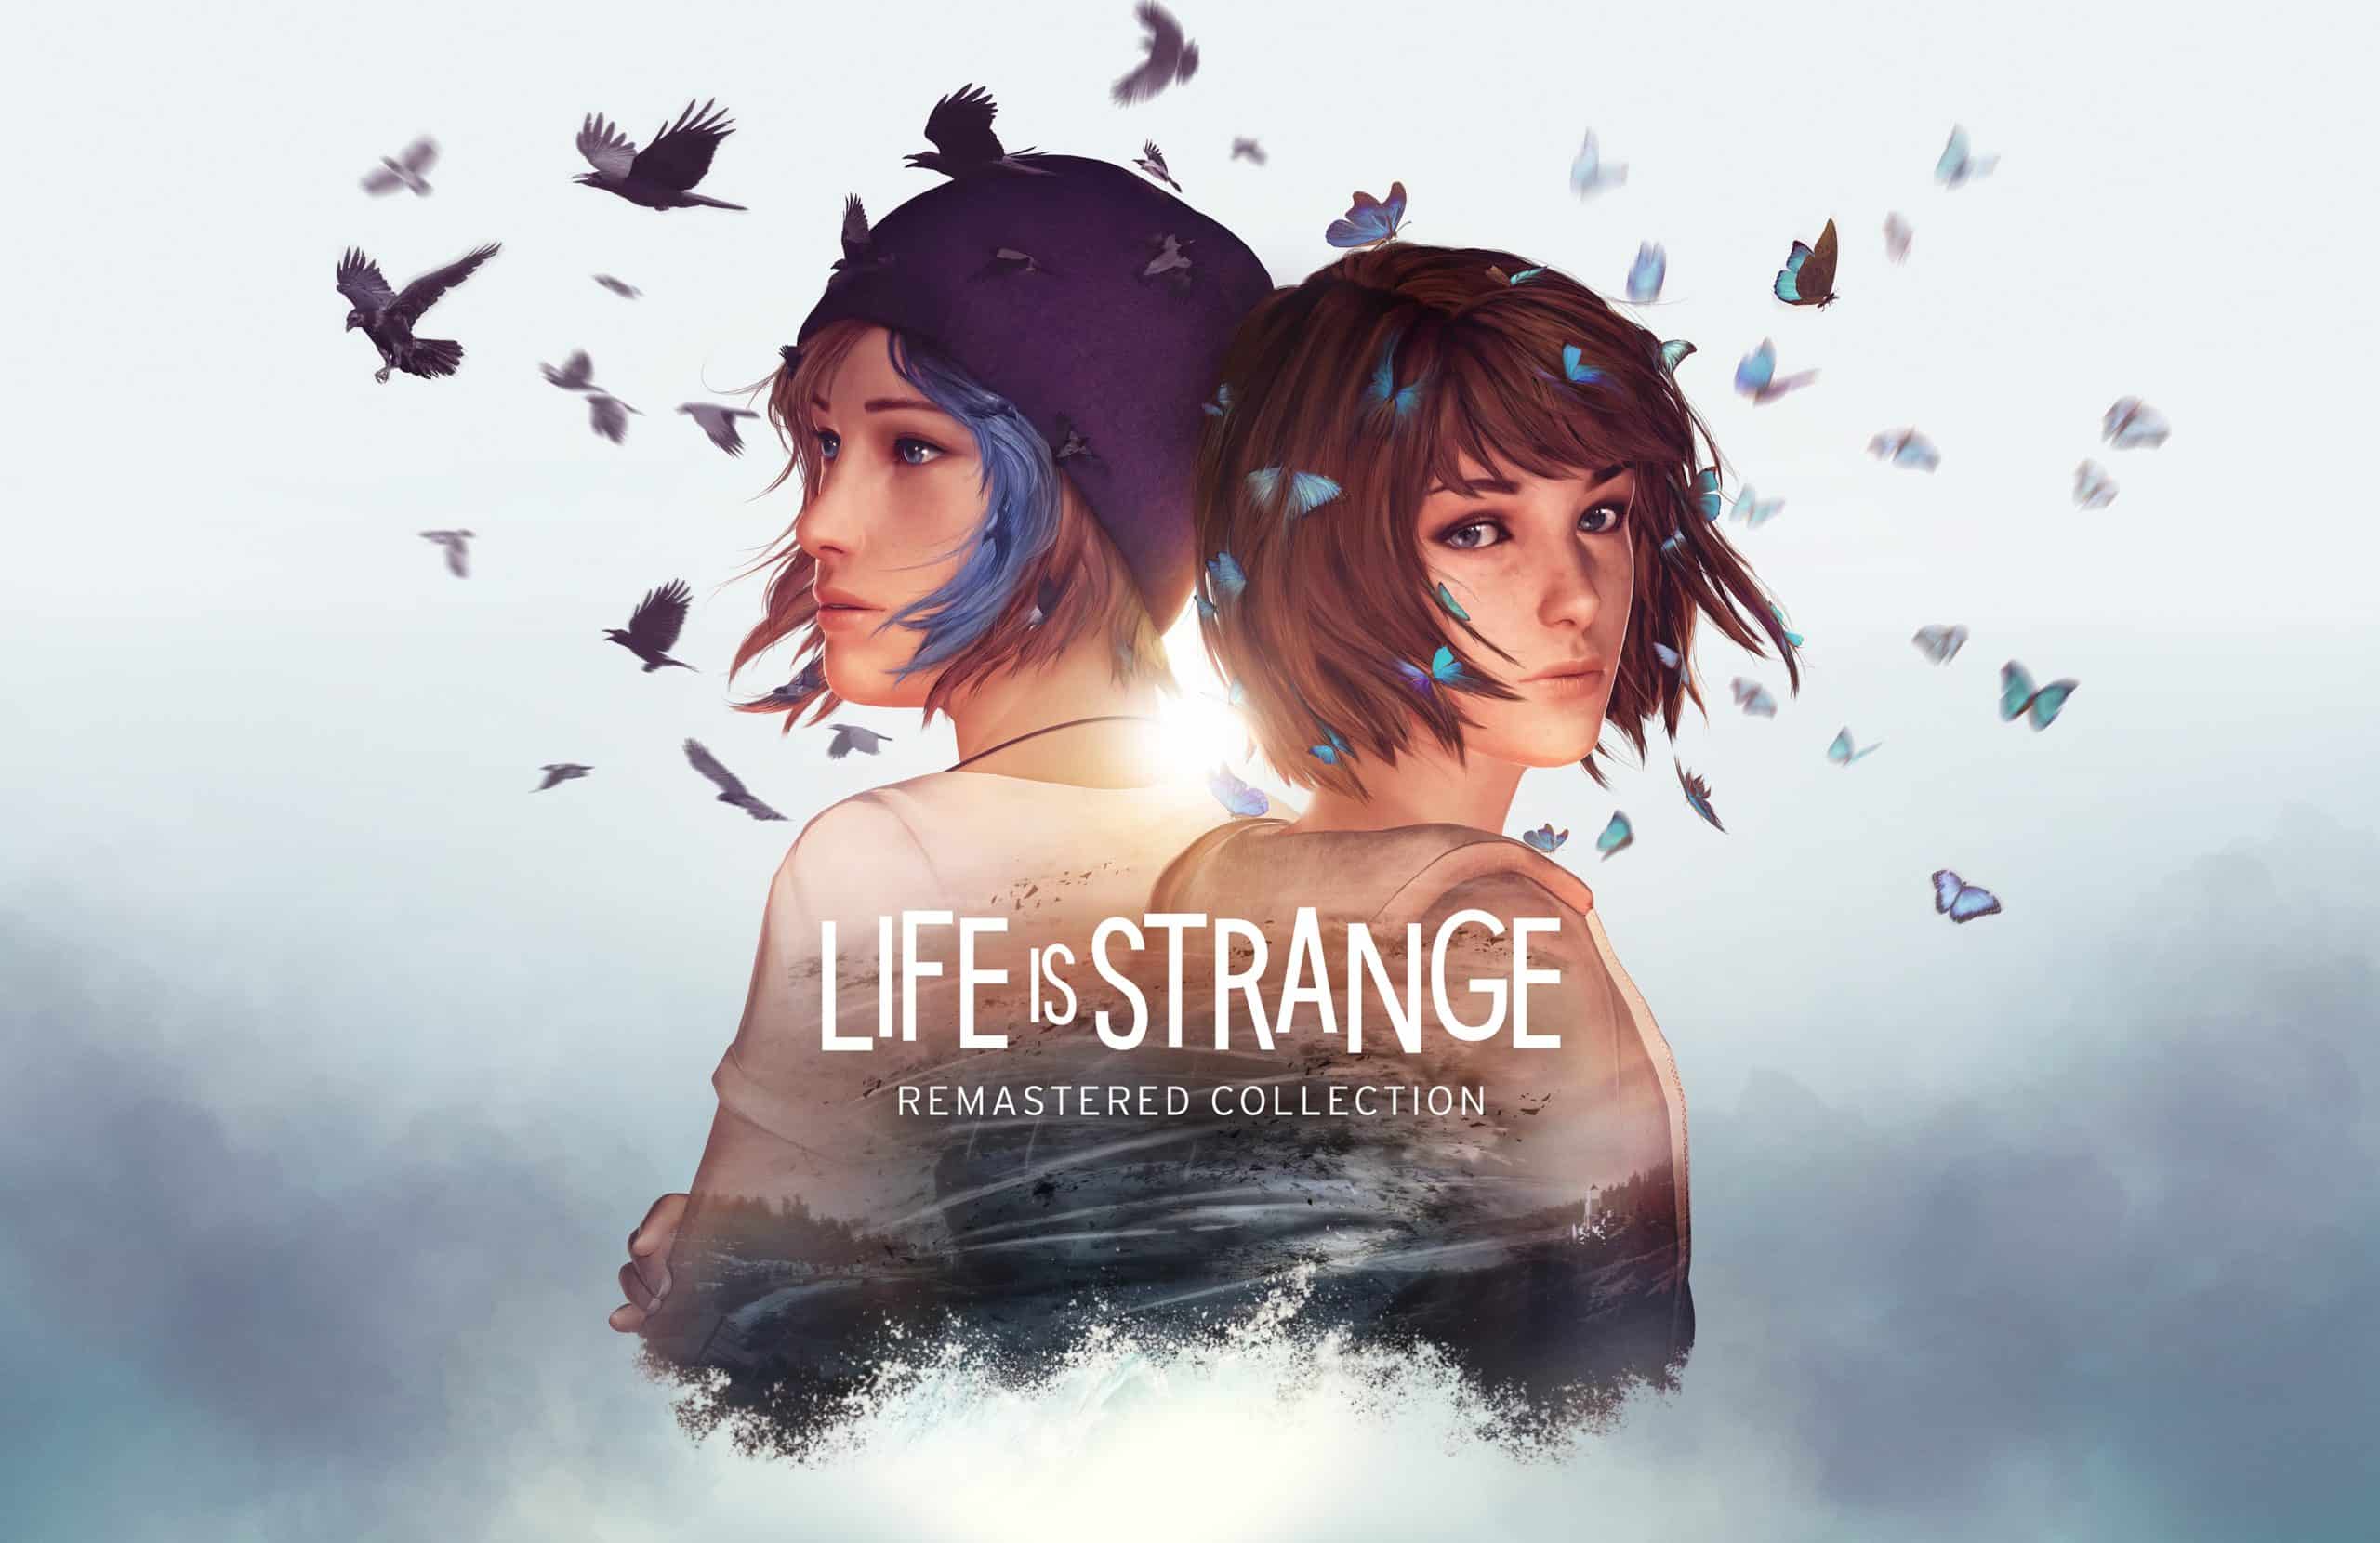 Life is Strange Remastered Collection Official Artwork